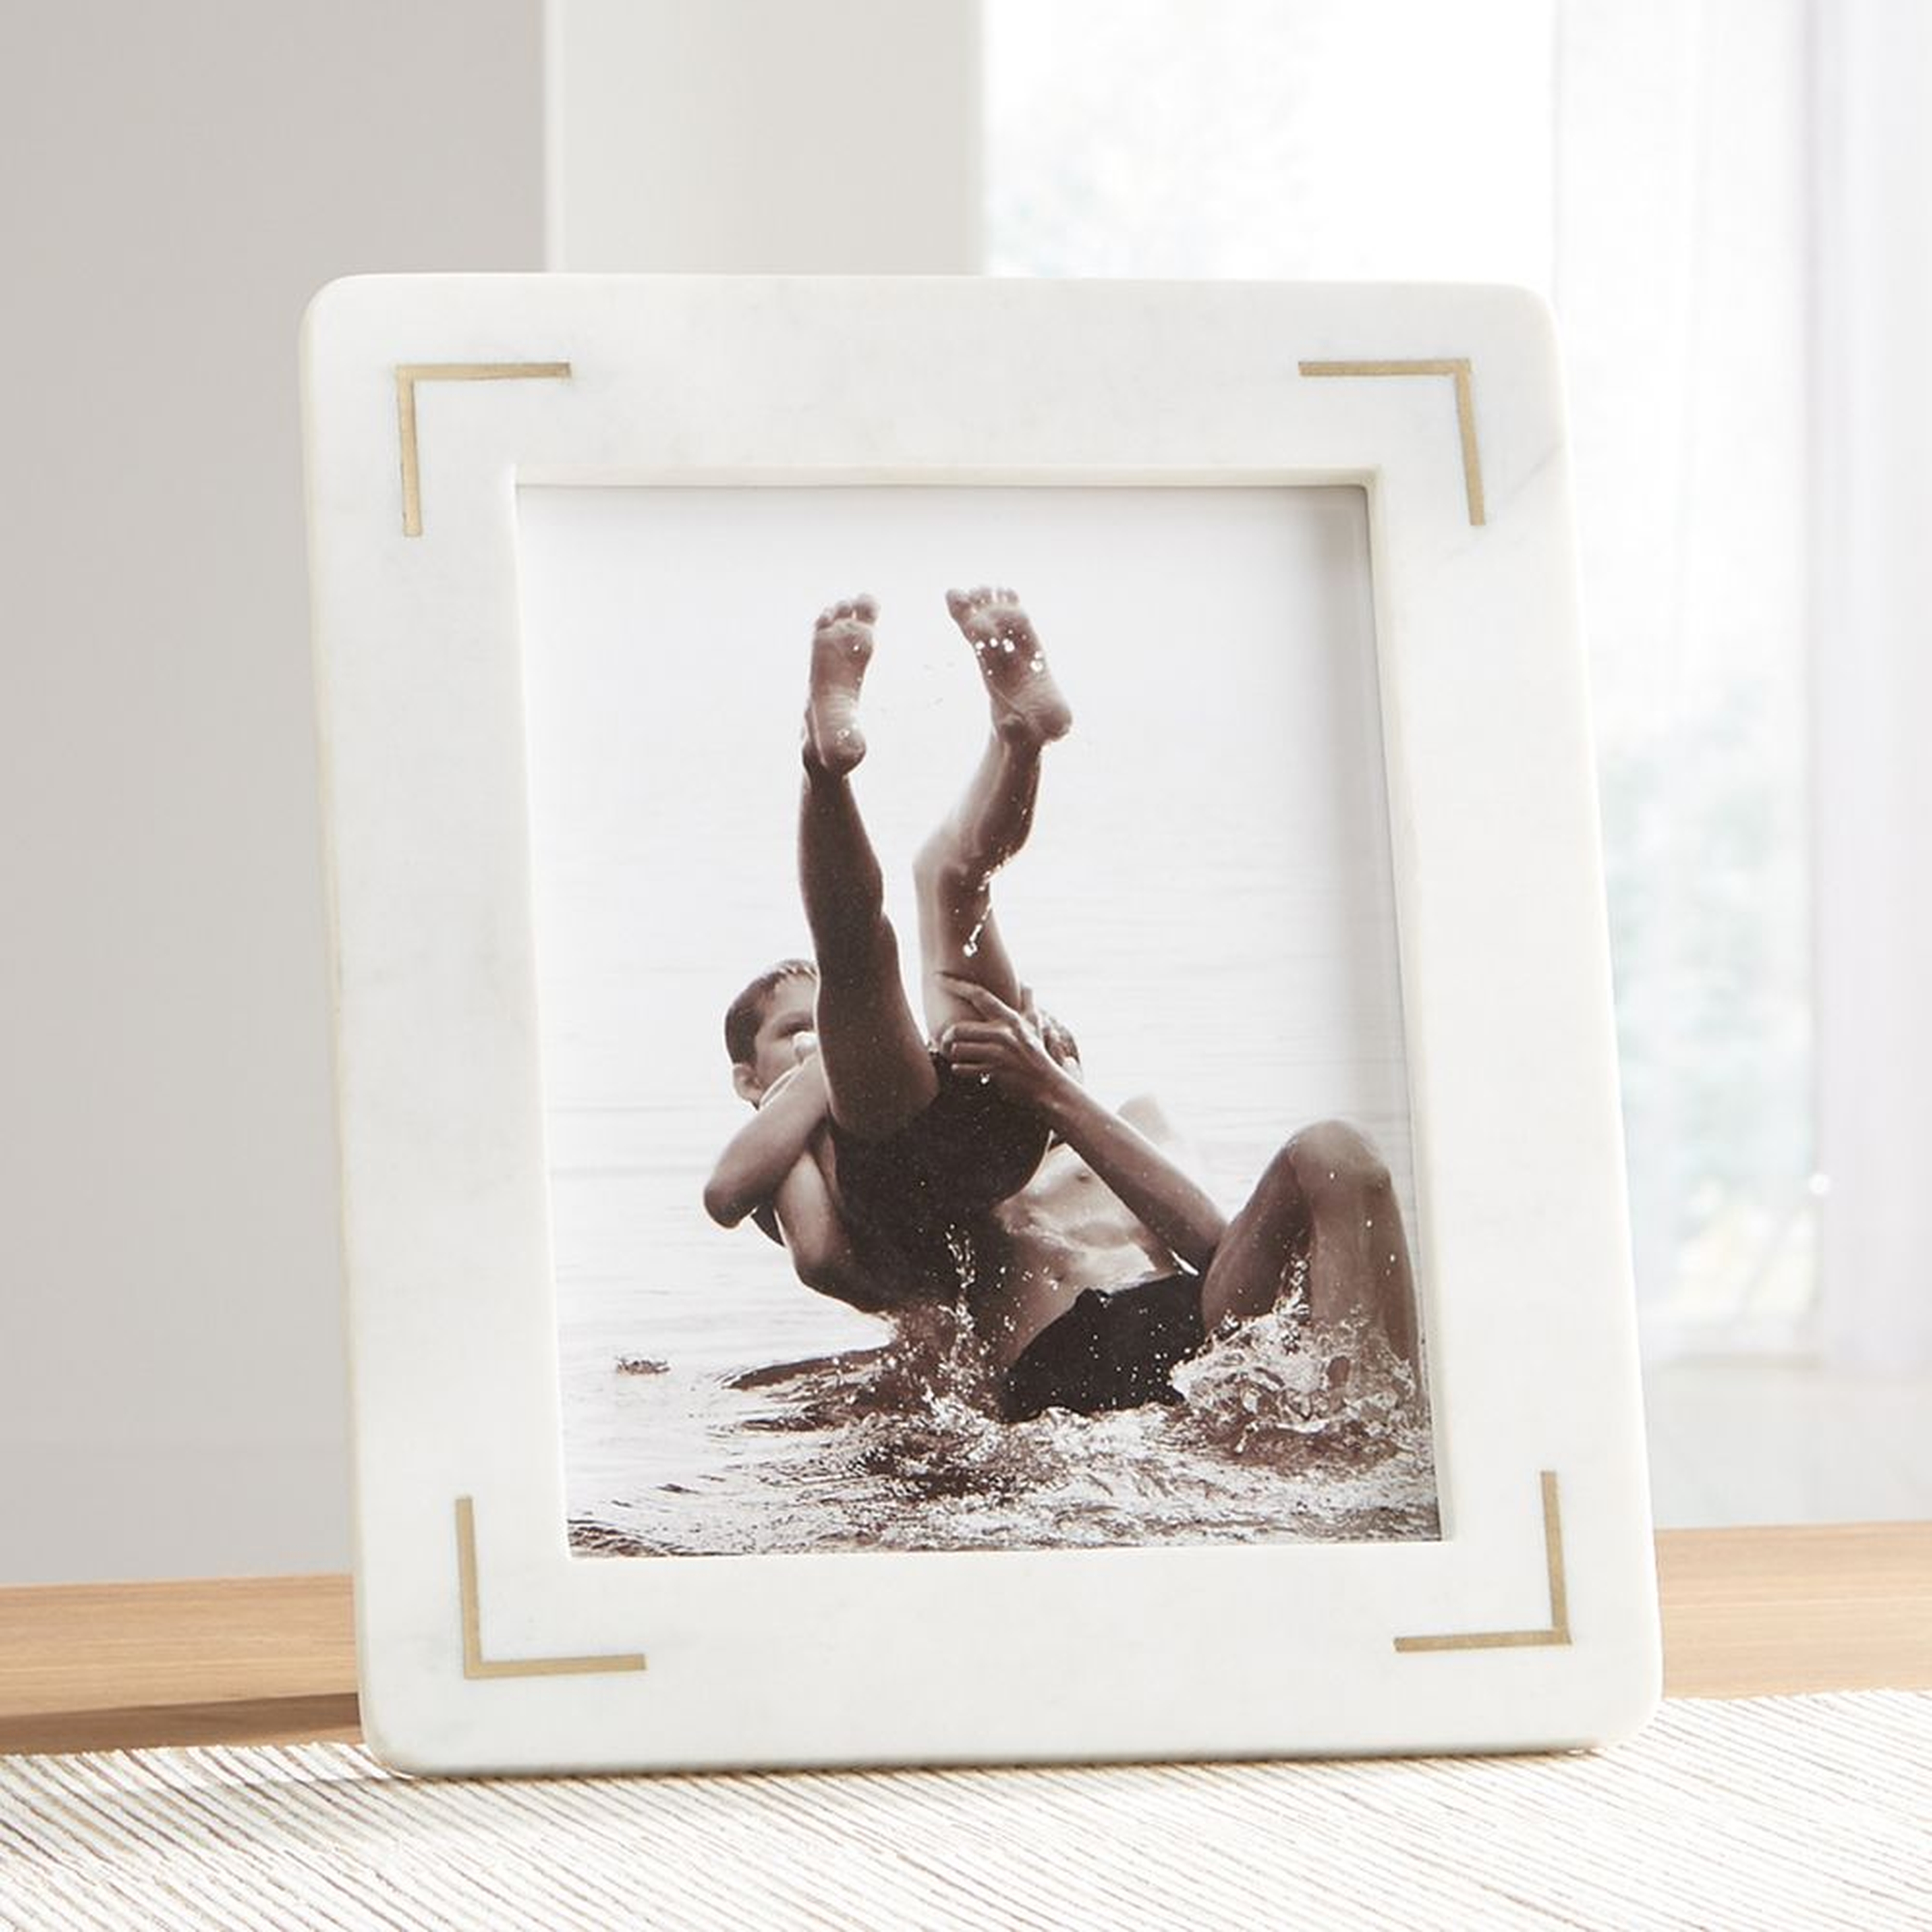 8"x10" White Marble Picture Frame - Crate and Barrel